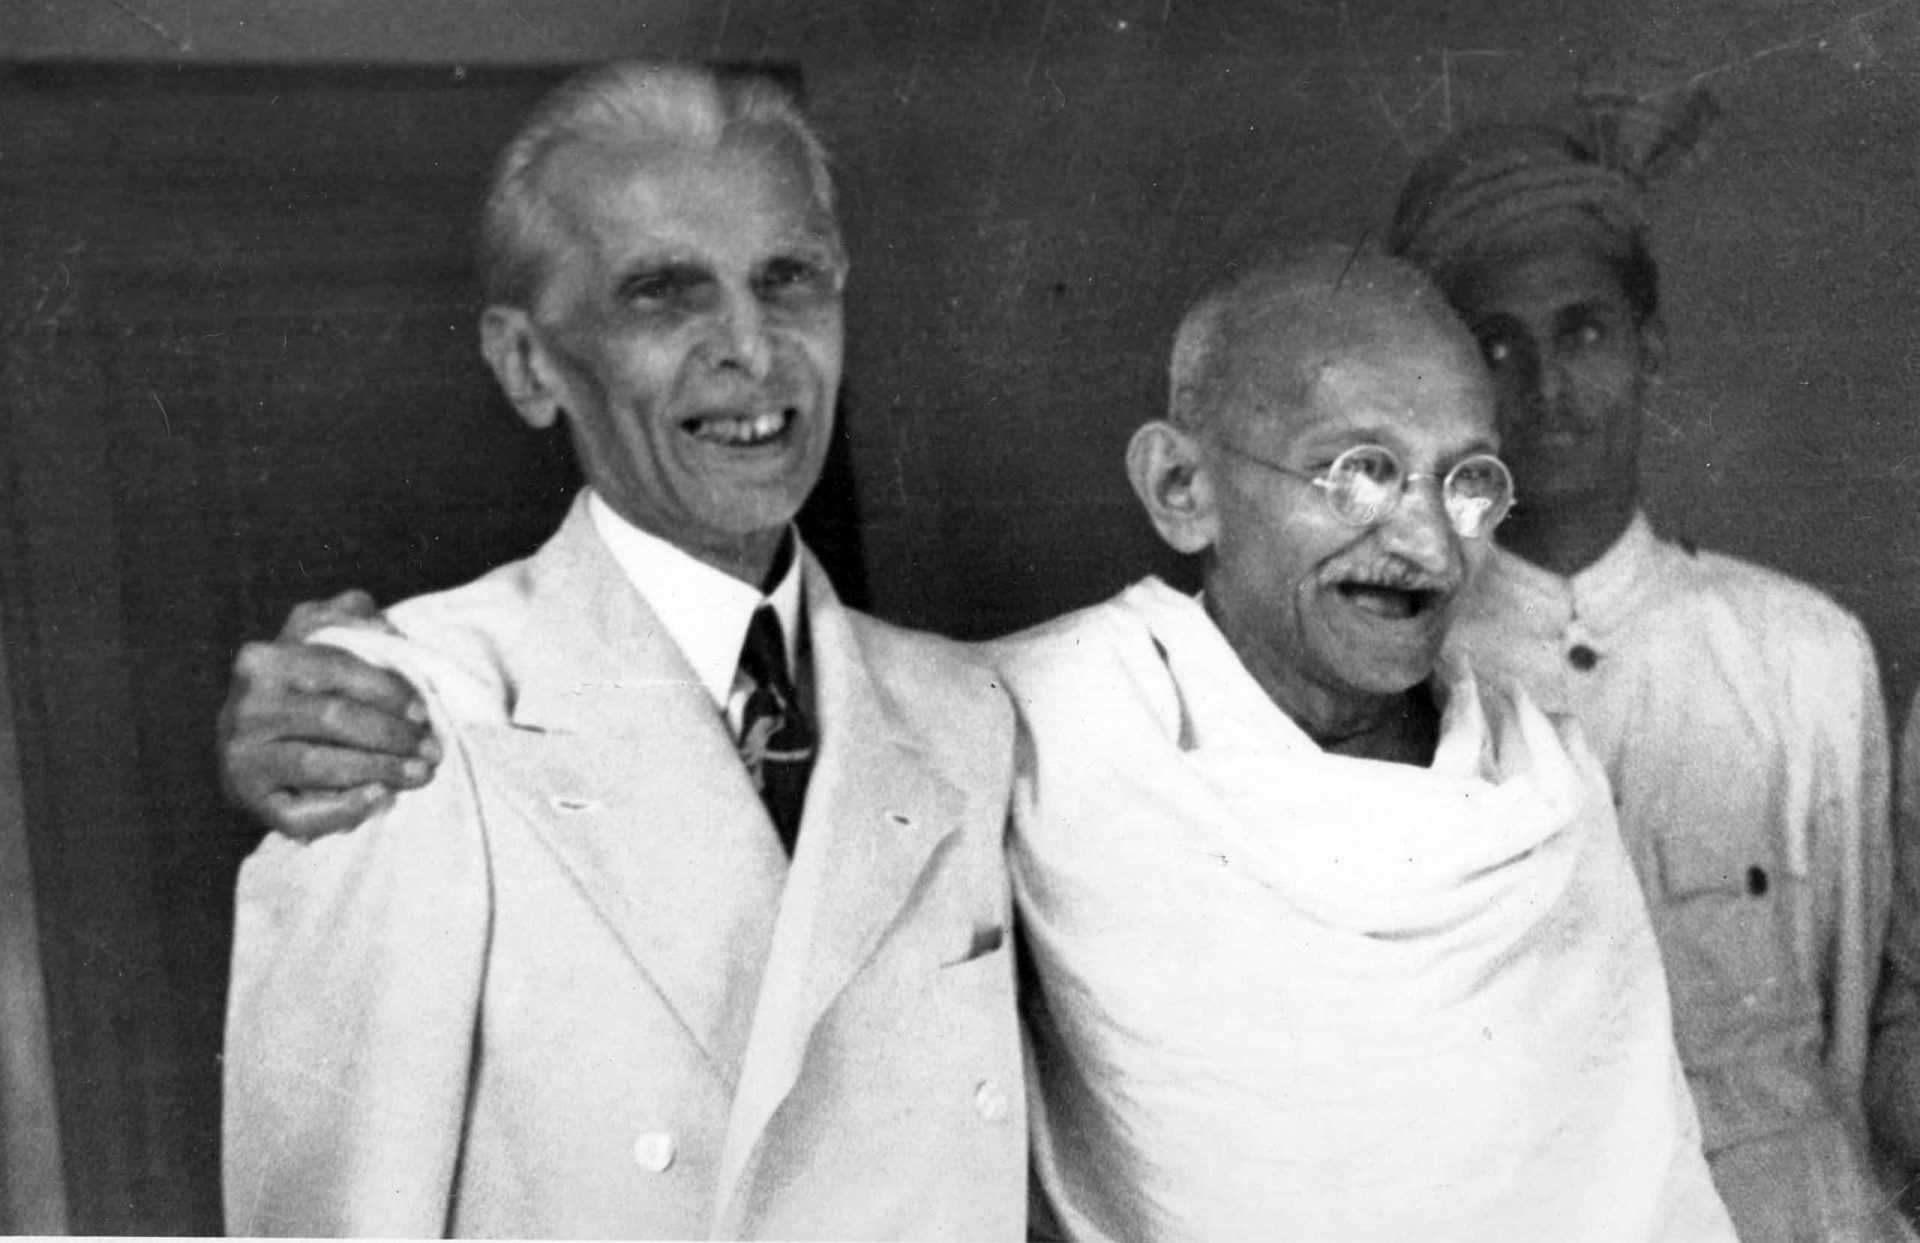 <p>Gandhi had always opposed the partition of the Indian subcontinent along religious lines. However, the Muslim League led by Muhammad Ali Jinnah (the future founder of Pakistan), demanded "Divide and Quit India." The Direct Action Day of August 16, 1946, called for by Jinnah led to a mass cycle of violence against Hindus and retaliatory action against Muslims. The threat of civil war across the Indian subcontinent was palpable. Pictured is Gandhi with Muhammad Ali Jinnah. </p><p><a href="https://www.msn.com/en-us/community/channel/vid-7xx8mnucu55yw63we9va2gwr7uihbxwc68fxqp25x6tg4ftibpra?cvid=94631541bc0f4f89bfd59158d696ad7e">Follow us and access great exclusive content every day</a></p>